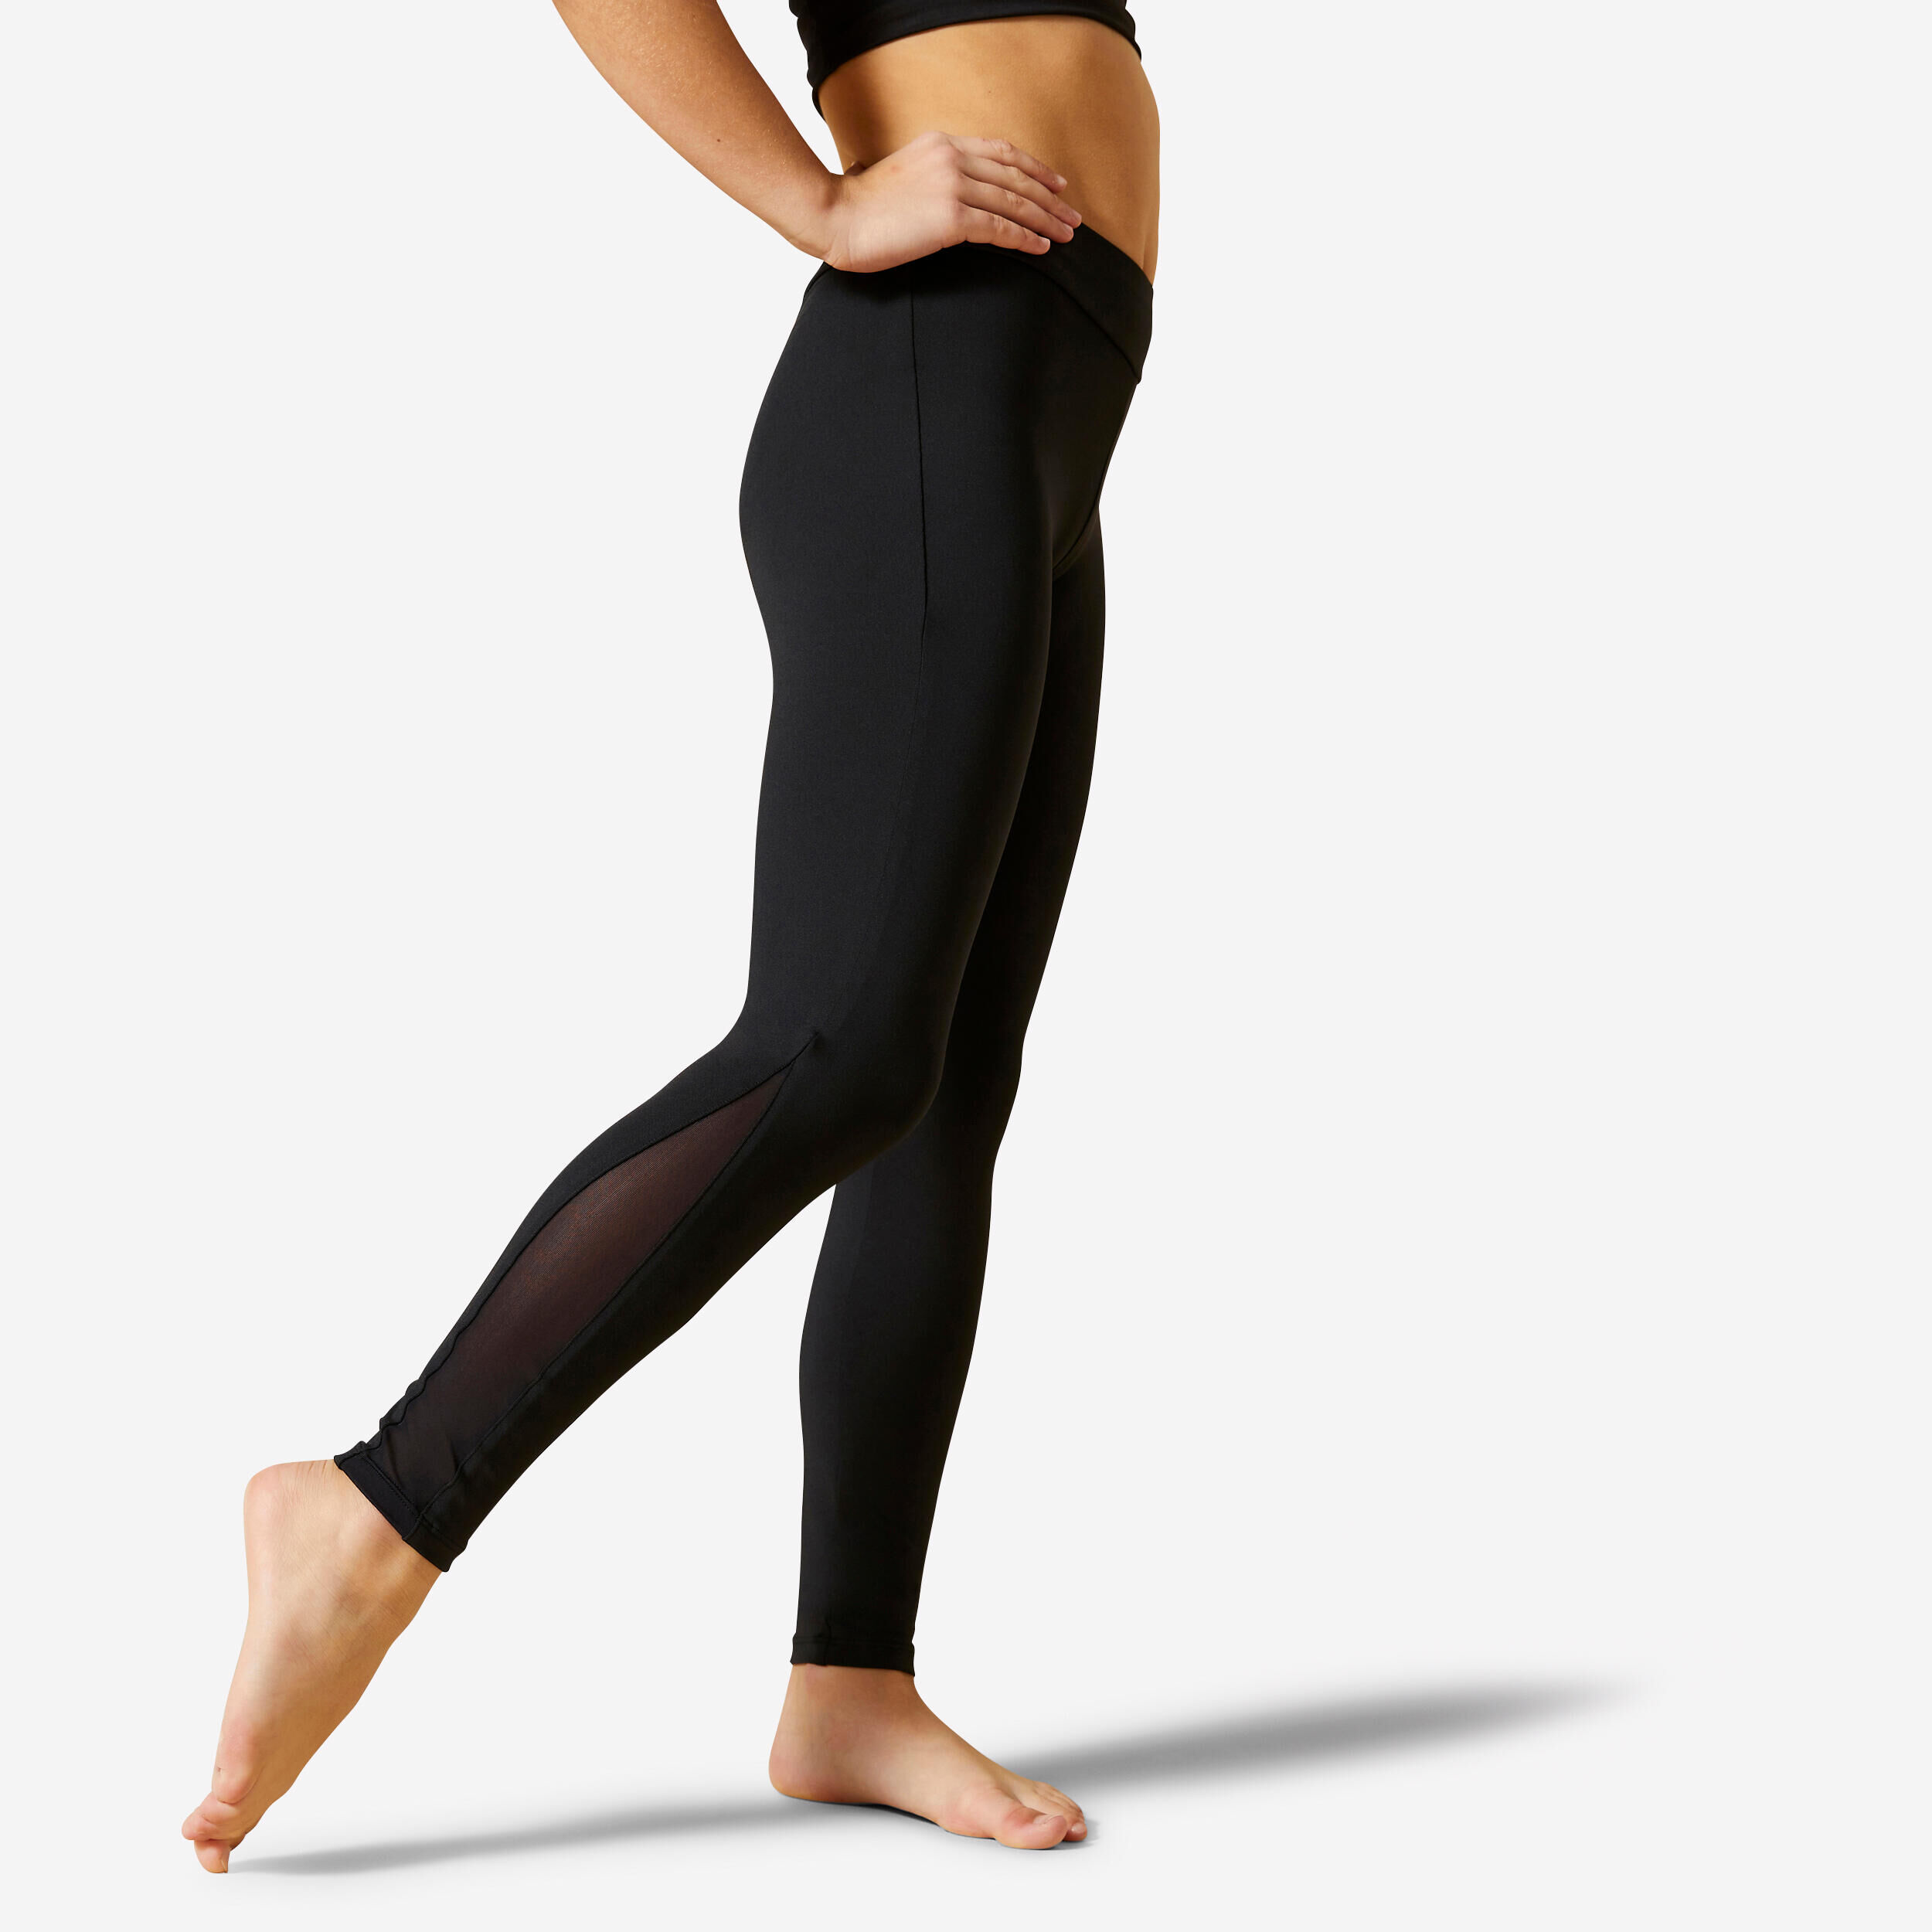 Peds Women's Brushed Terry Cotton Legging with Wide Comfort-Black